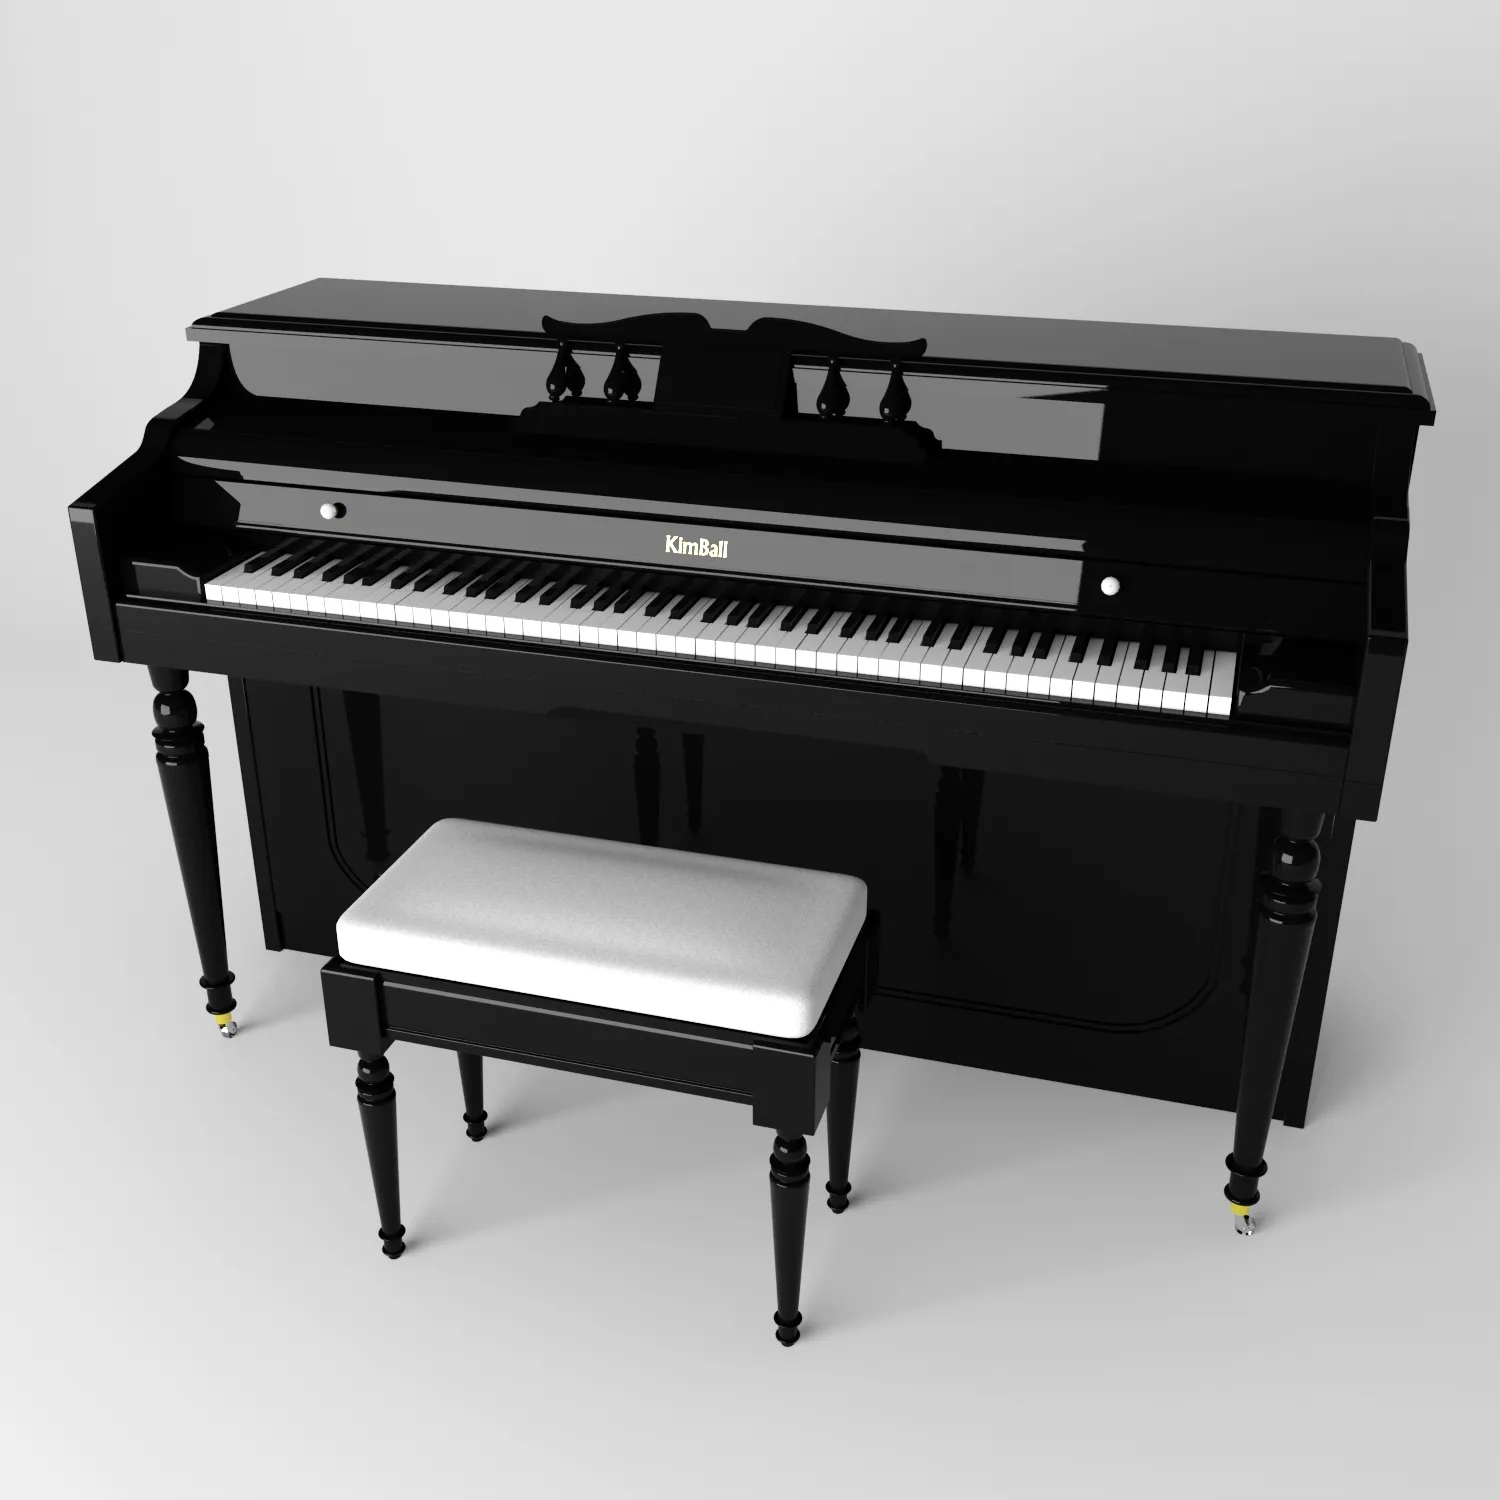 3dsky - Classical piano - Musical instrument - 3D model